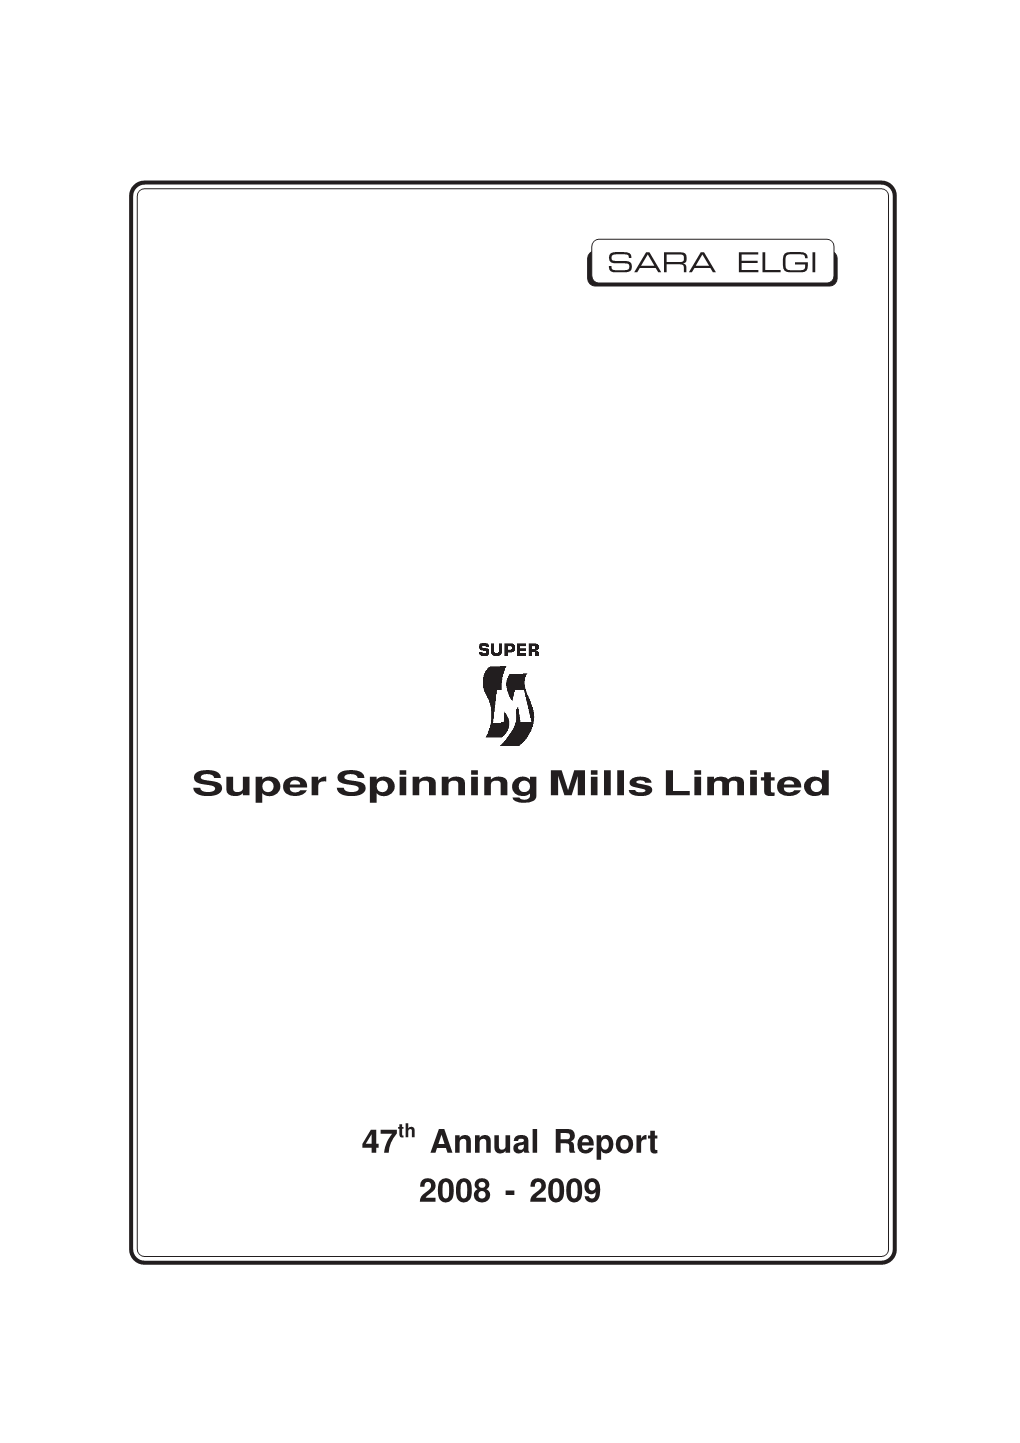 Annual Report 2008 - 2009 Super Spinning Mills Limited